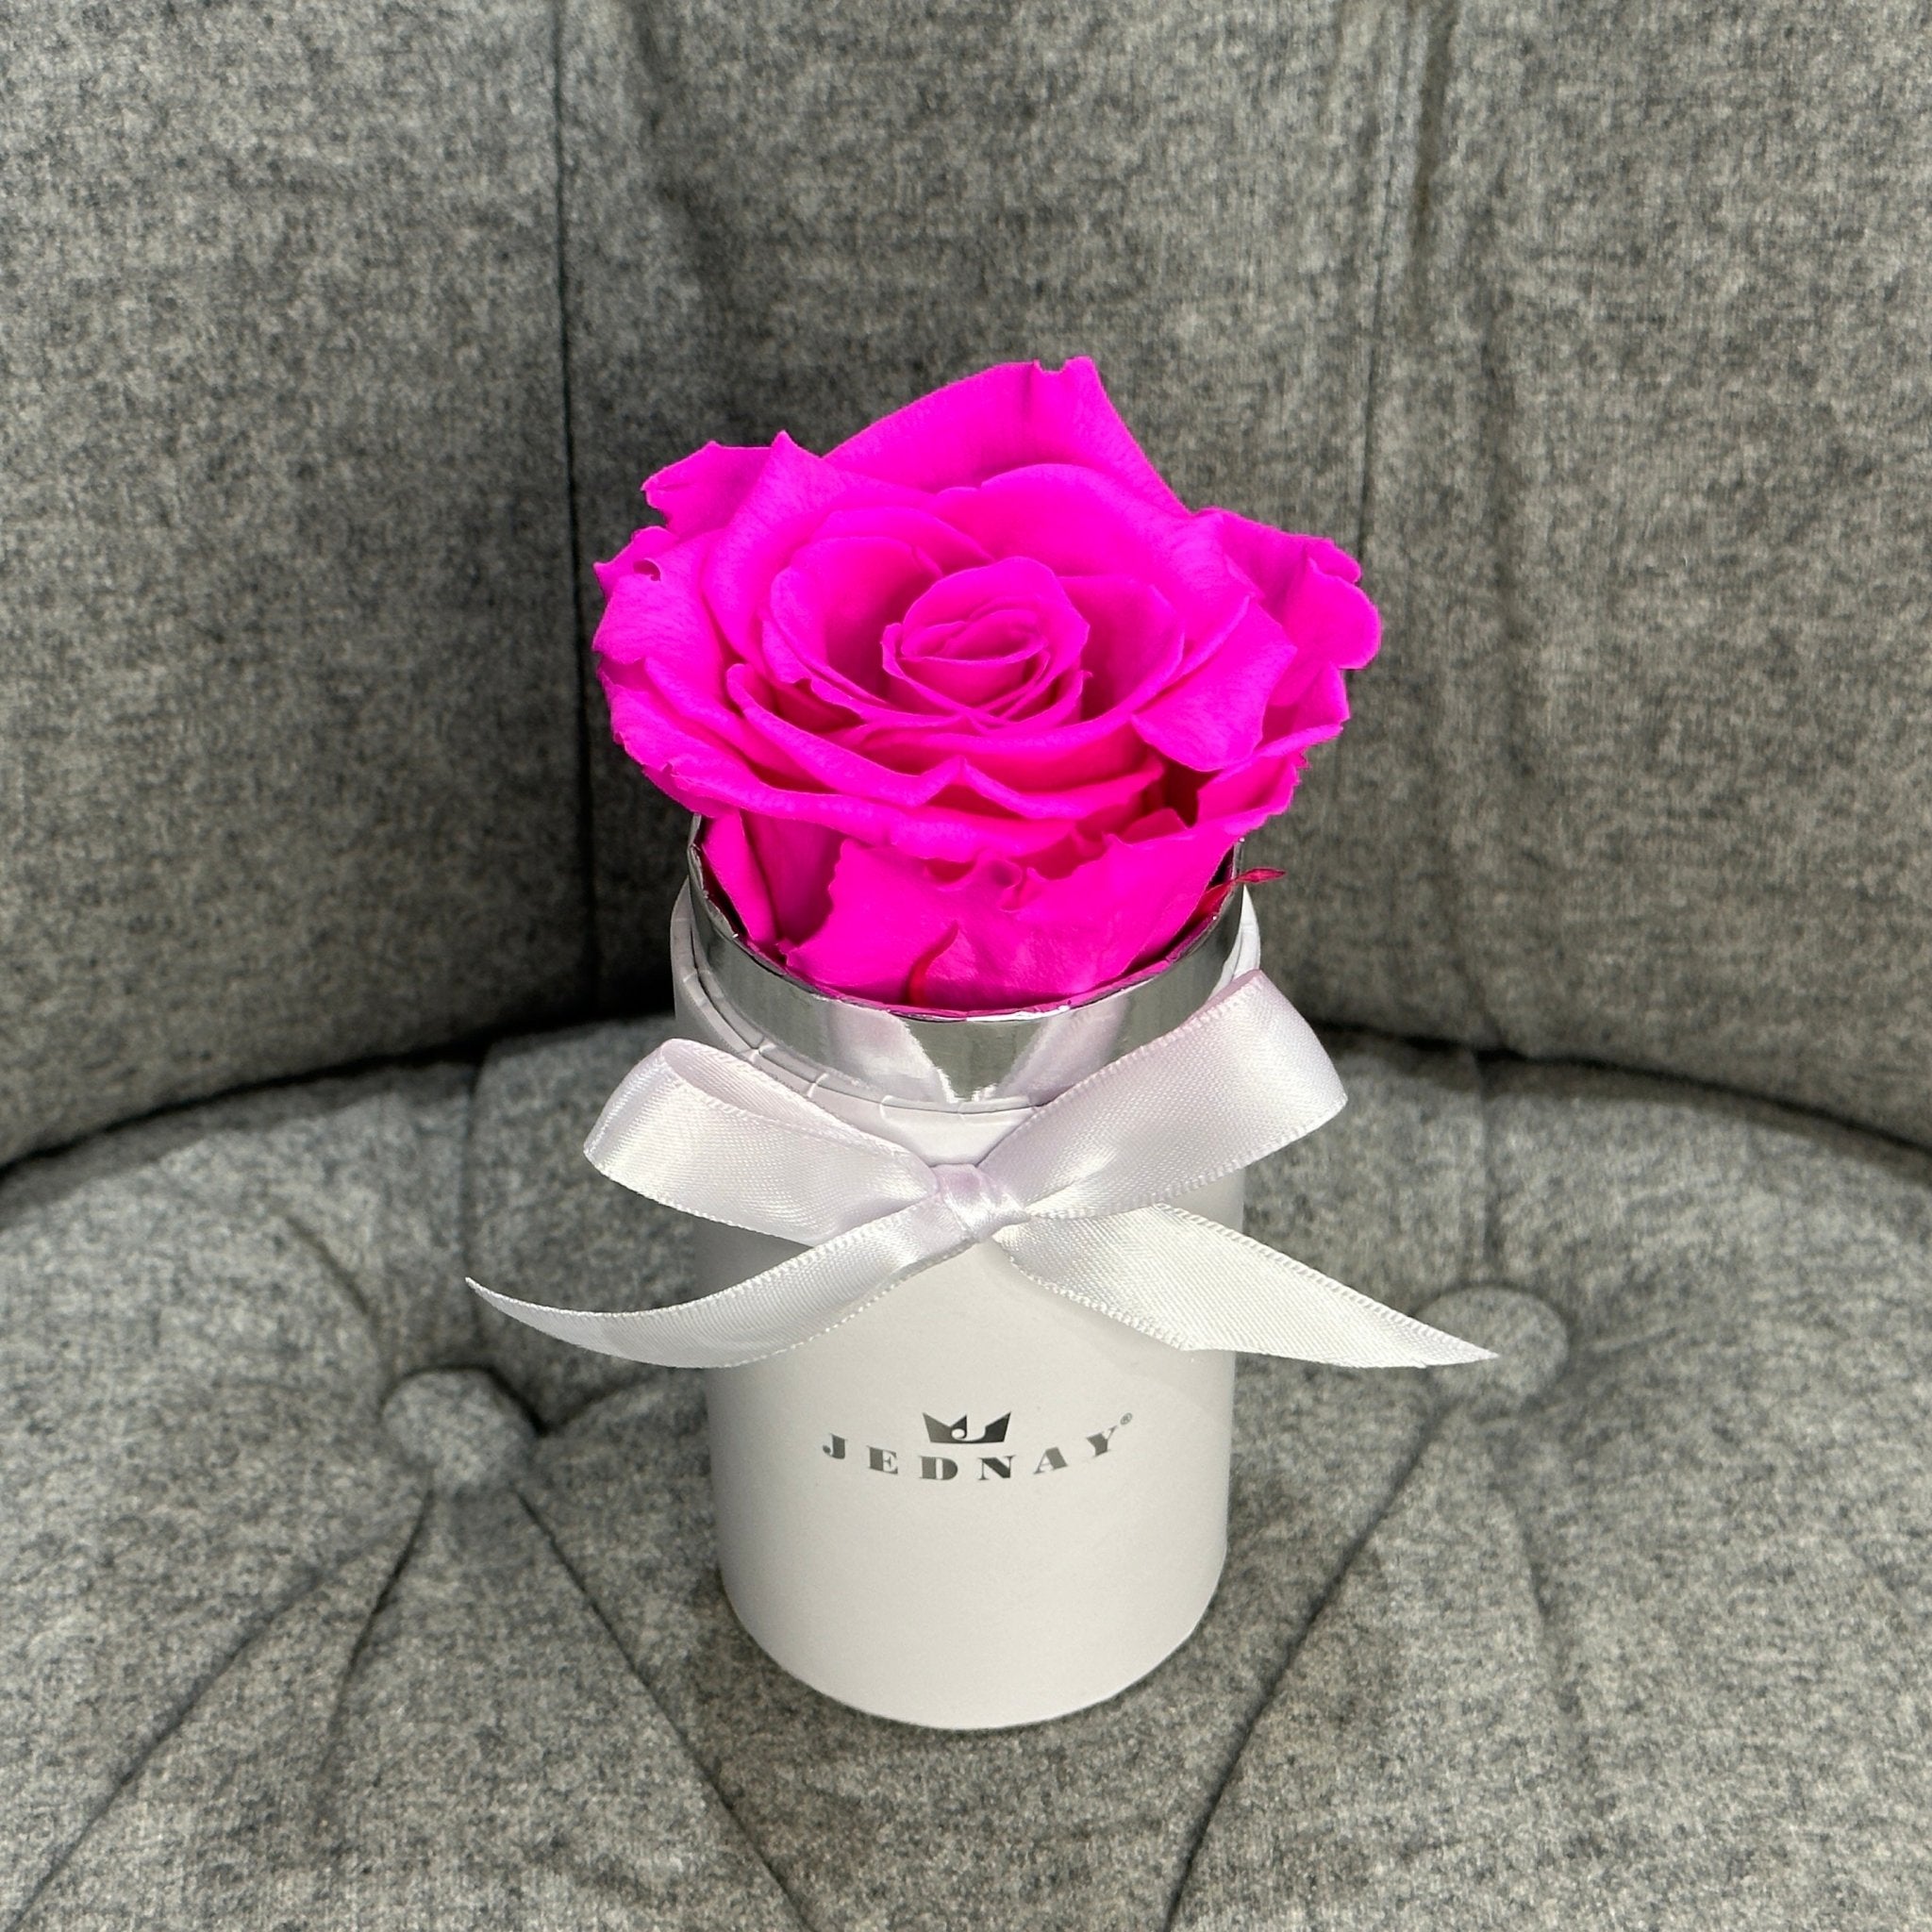 The Uno - Bubblegum Pink Eternal Rose - Classic White Box - Jednay Roses